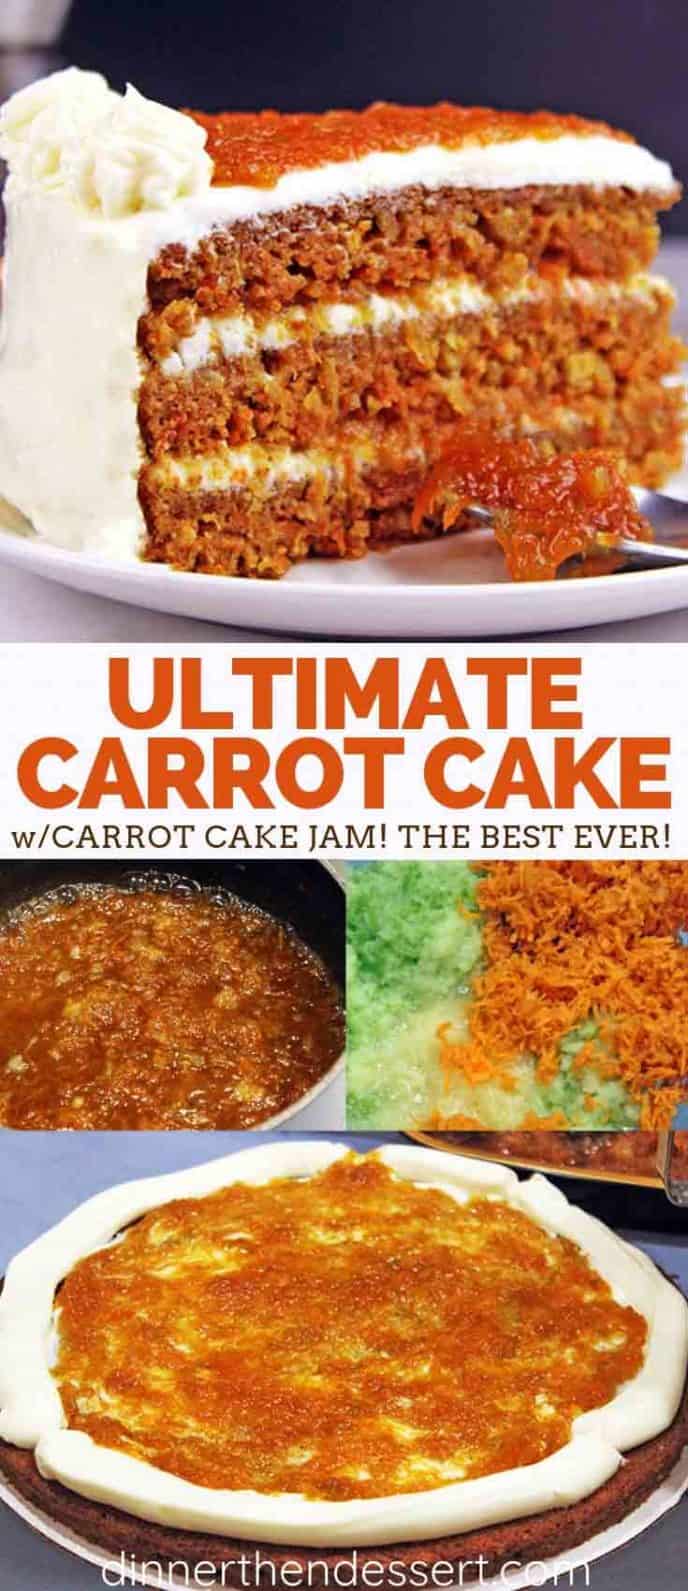 ultimate carrot cake step by step